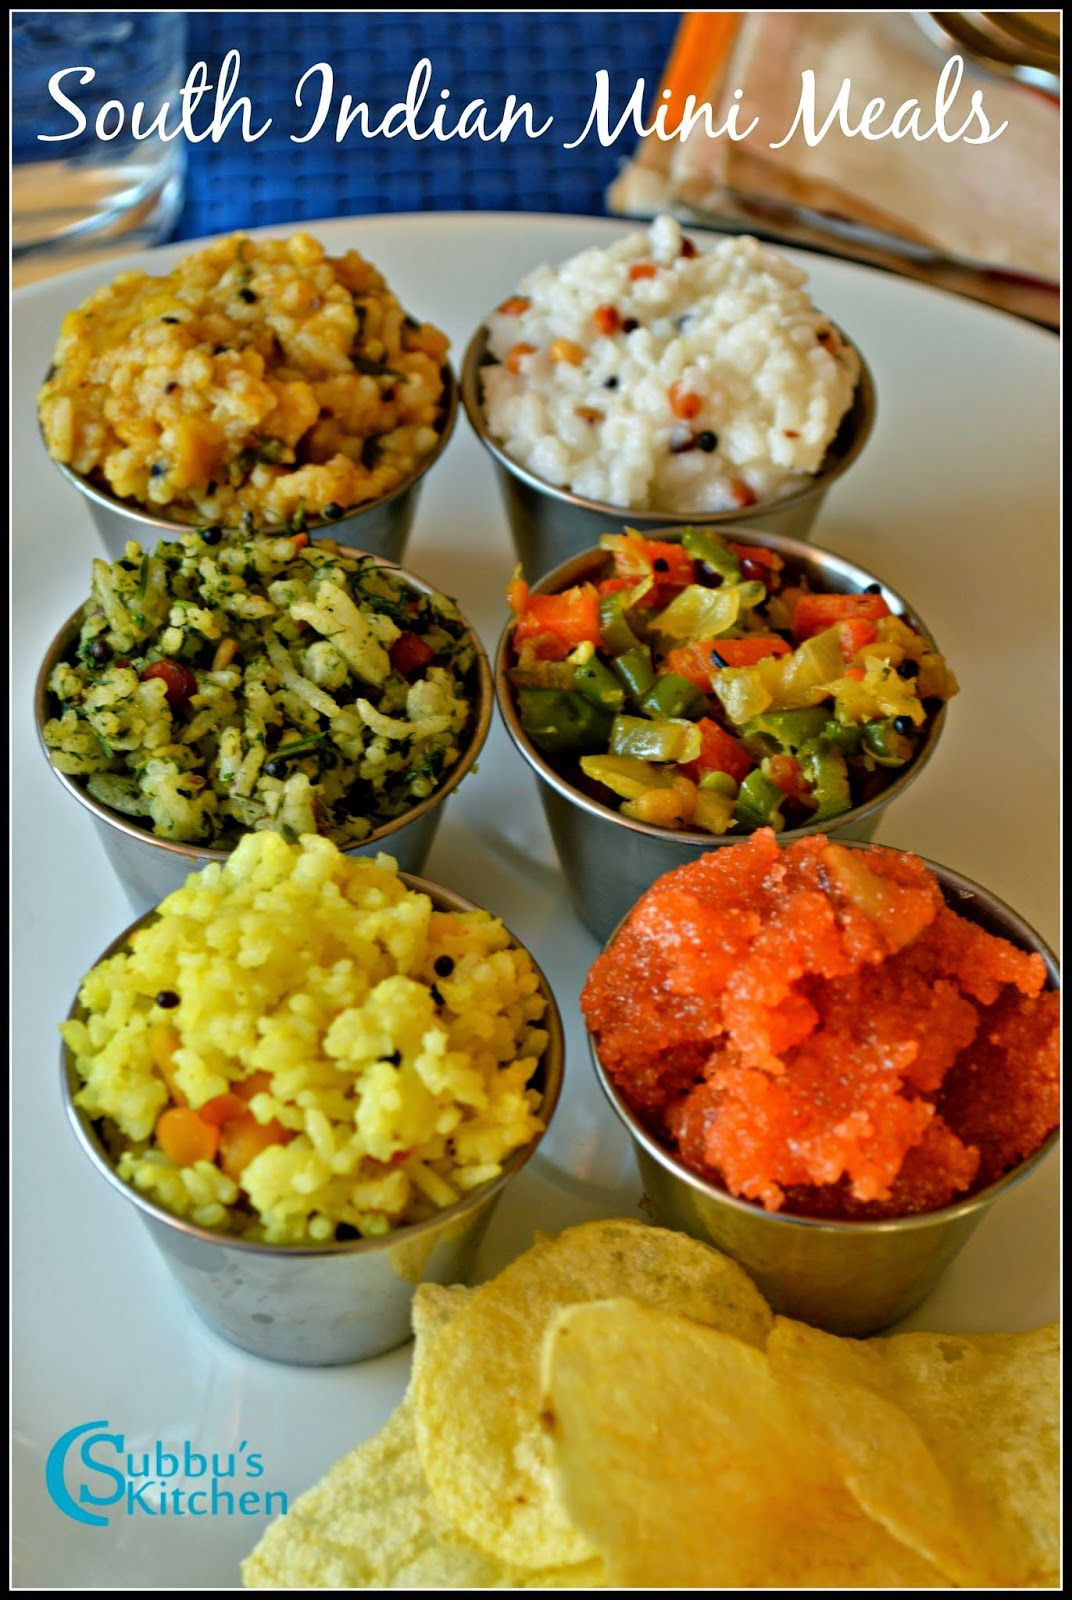 South Indian Dinner Ideas
 South Indian Lunch Menu 14 SouthIndian Mini Meals